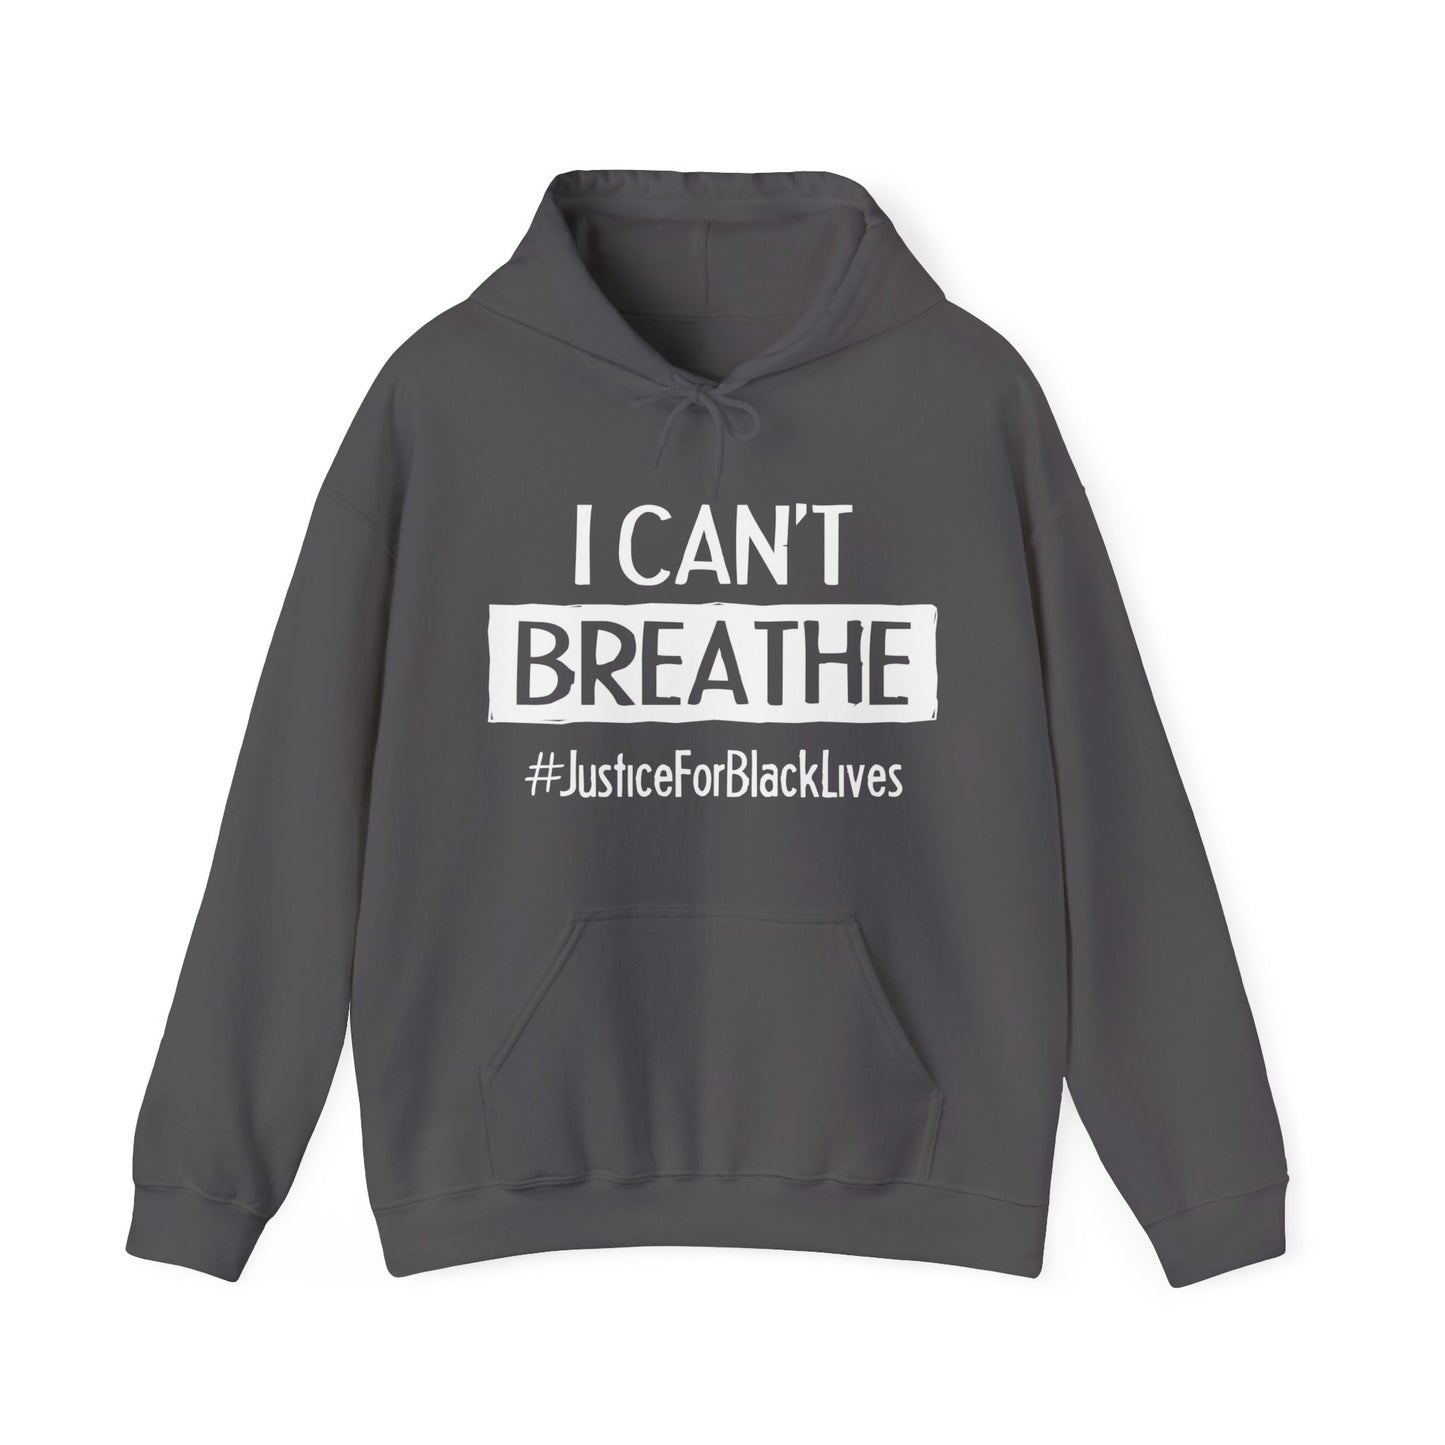 “I Can't Breathe” Unisex Hoodie